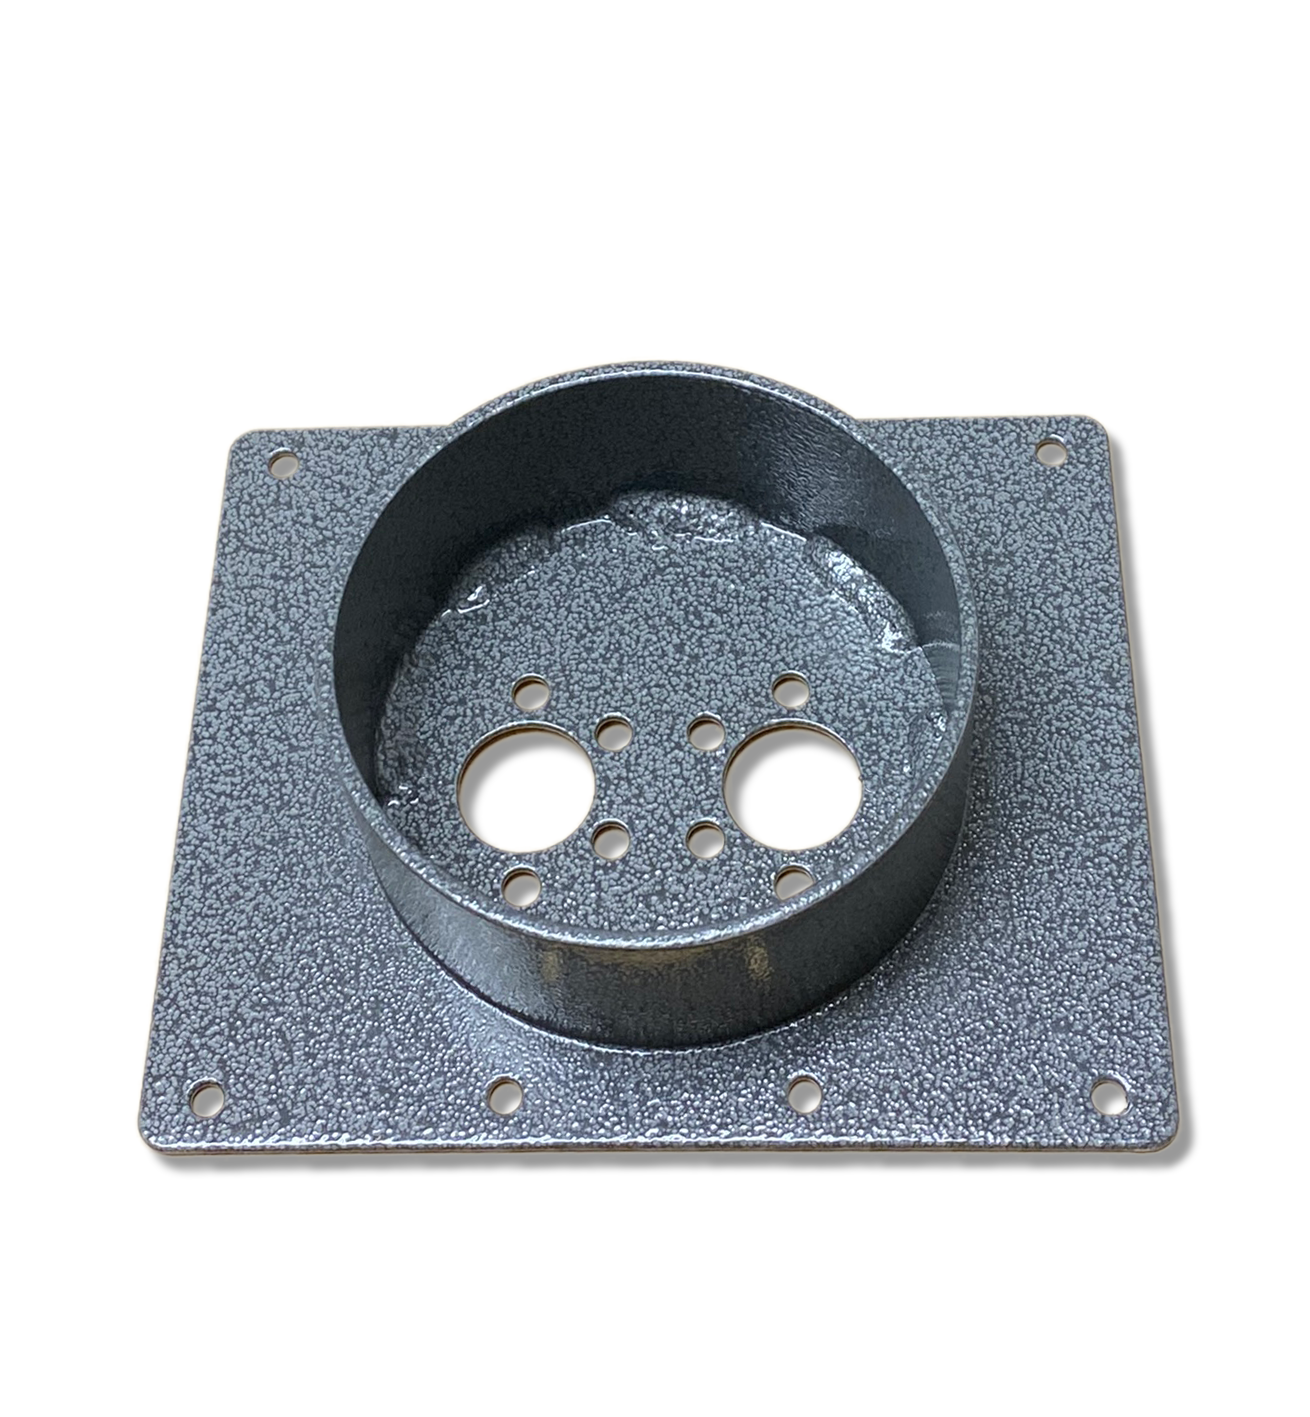 Air heater mounting plate for use with sub-floor